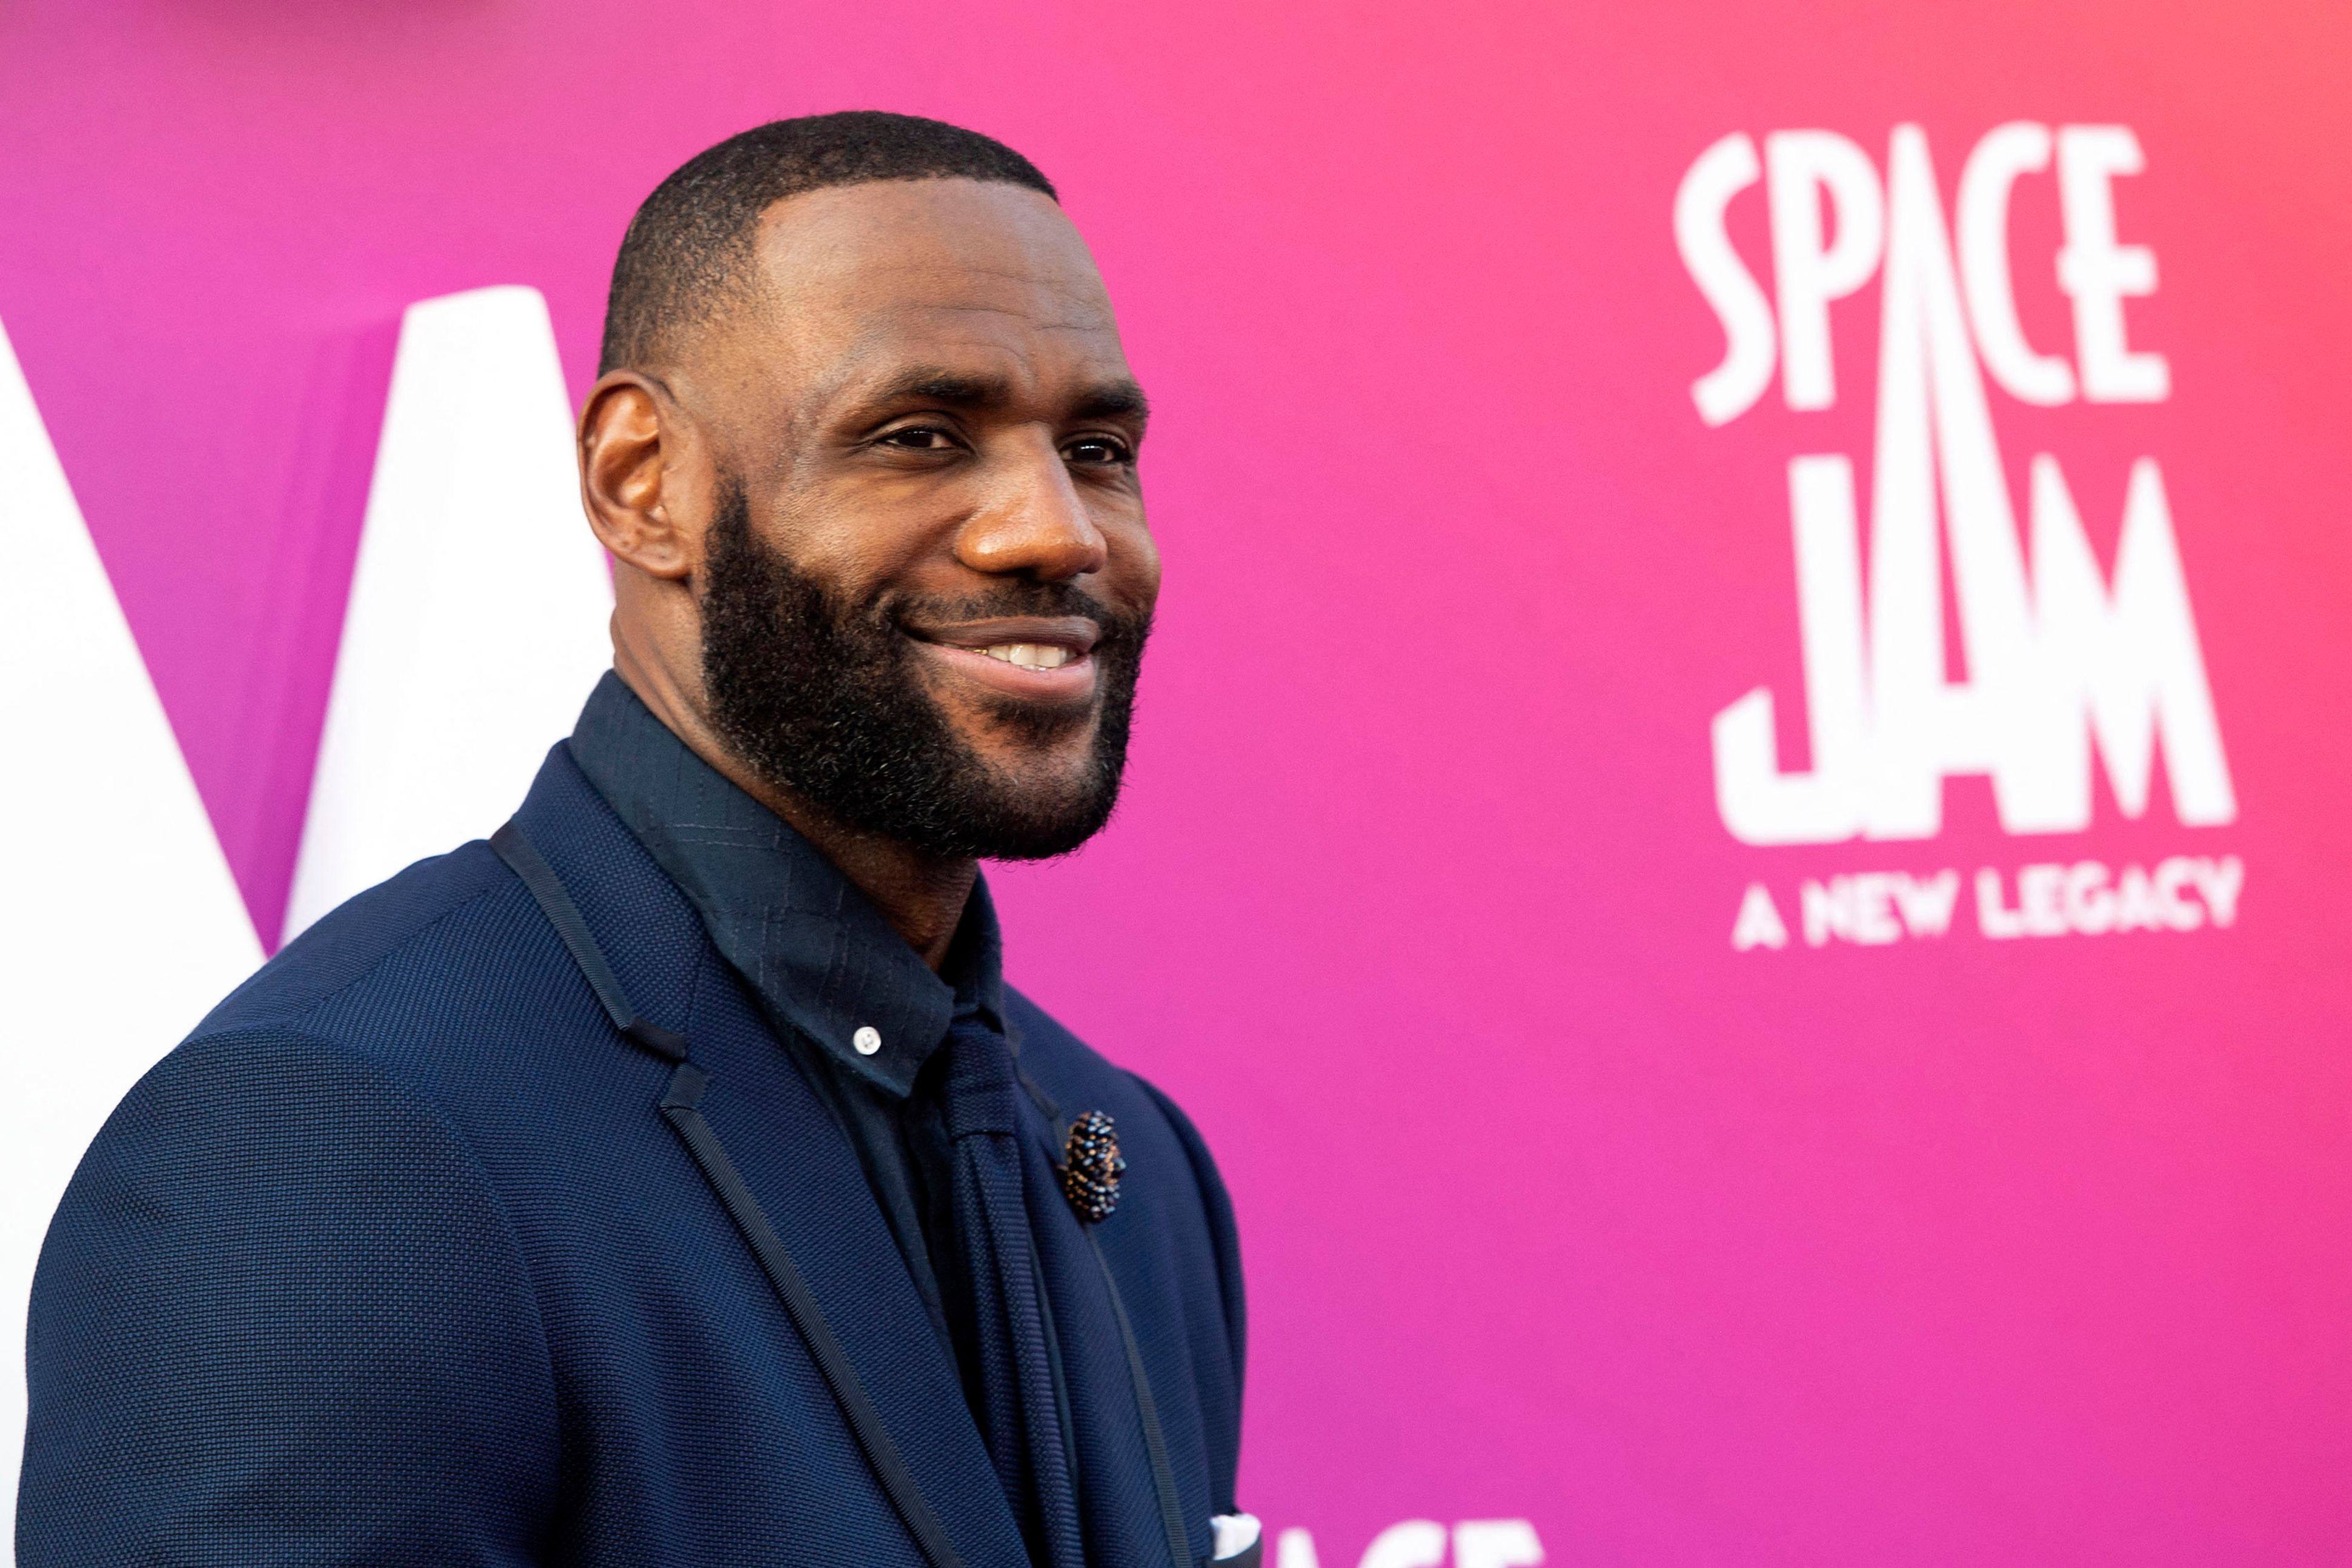 Basketball player/actor LeBron James arrives at the Warner Bros. Pictures world premiere of Space Jam: A New Legacy at the Regal LA Live in Los Angeles, California, on July 12, 2021. Photo: AFP